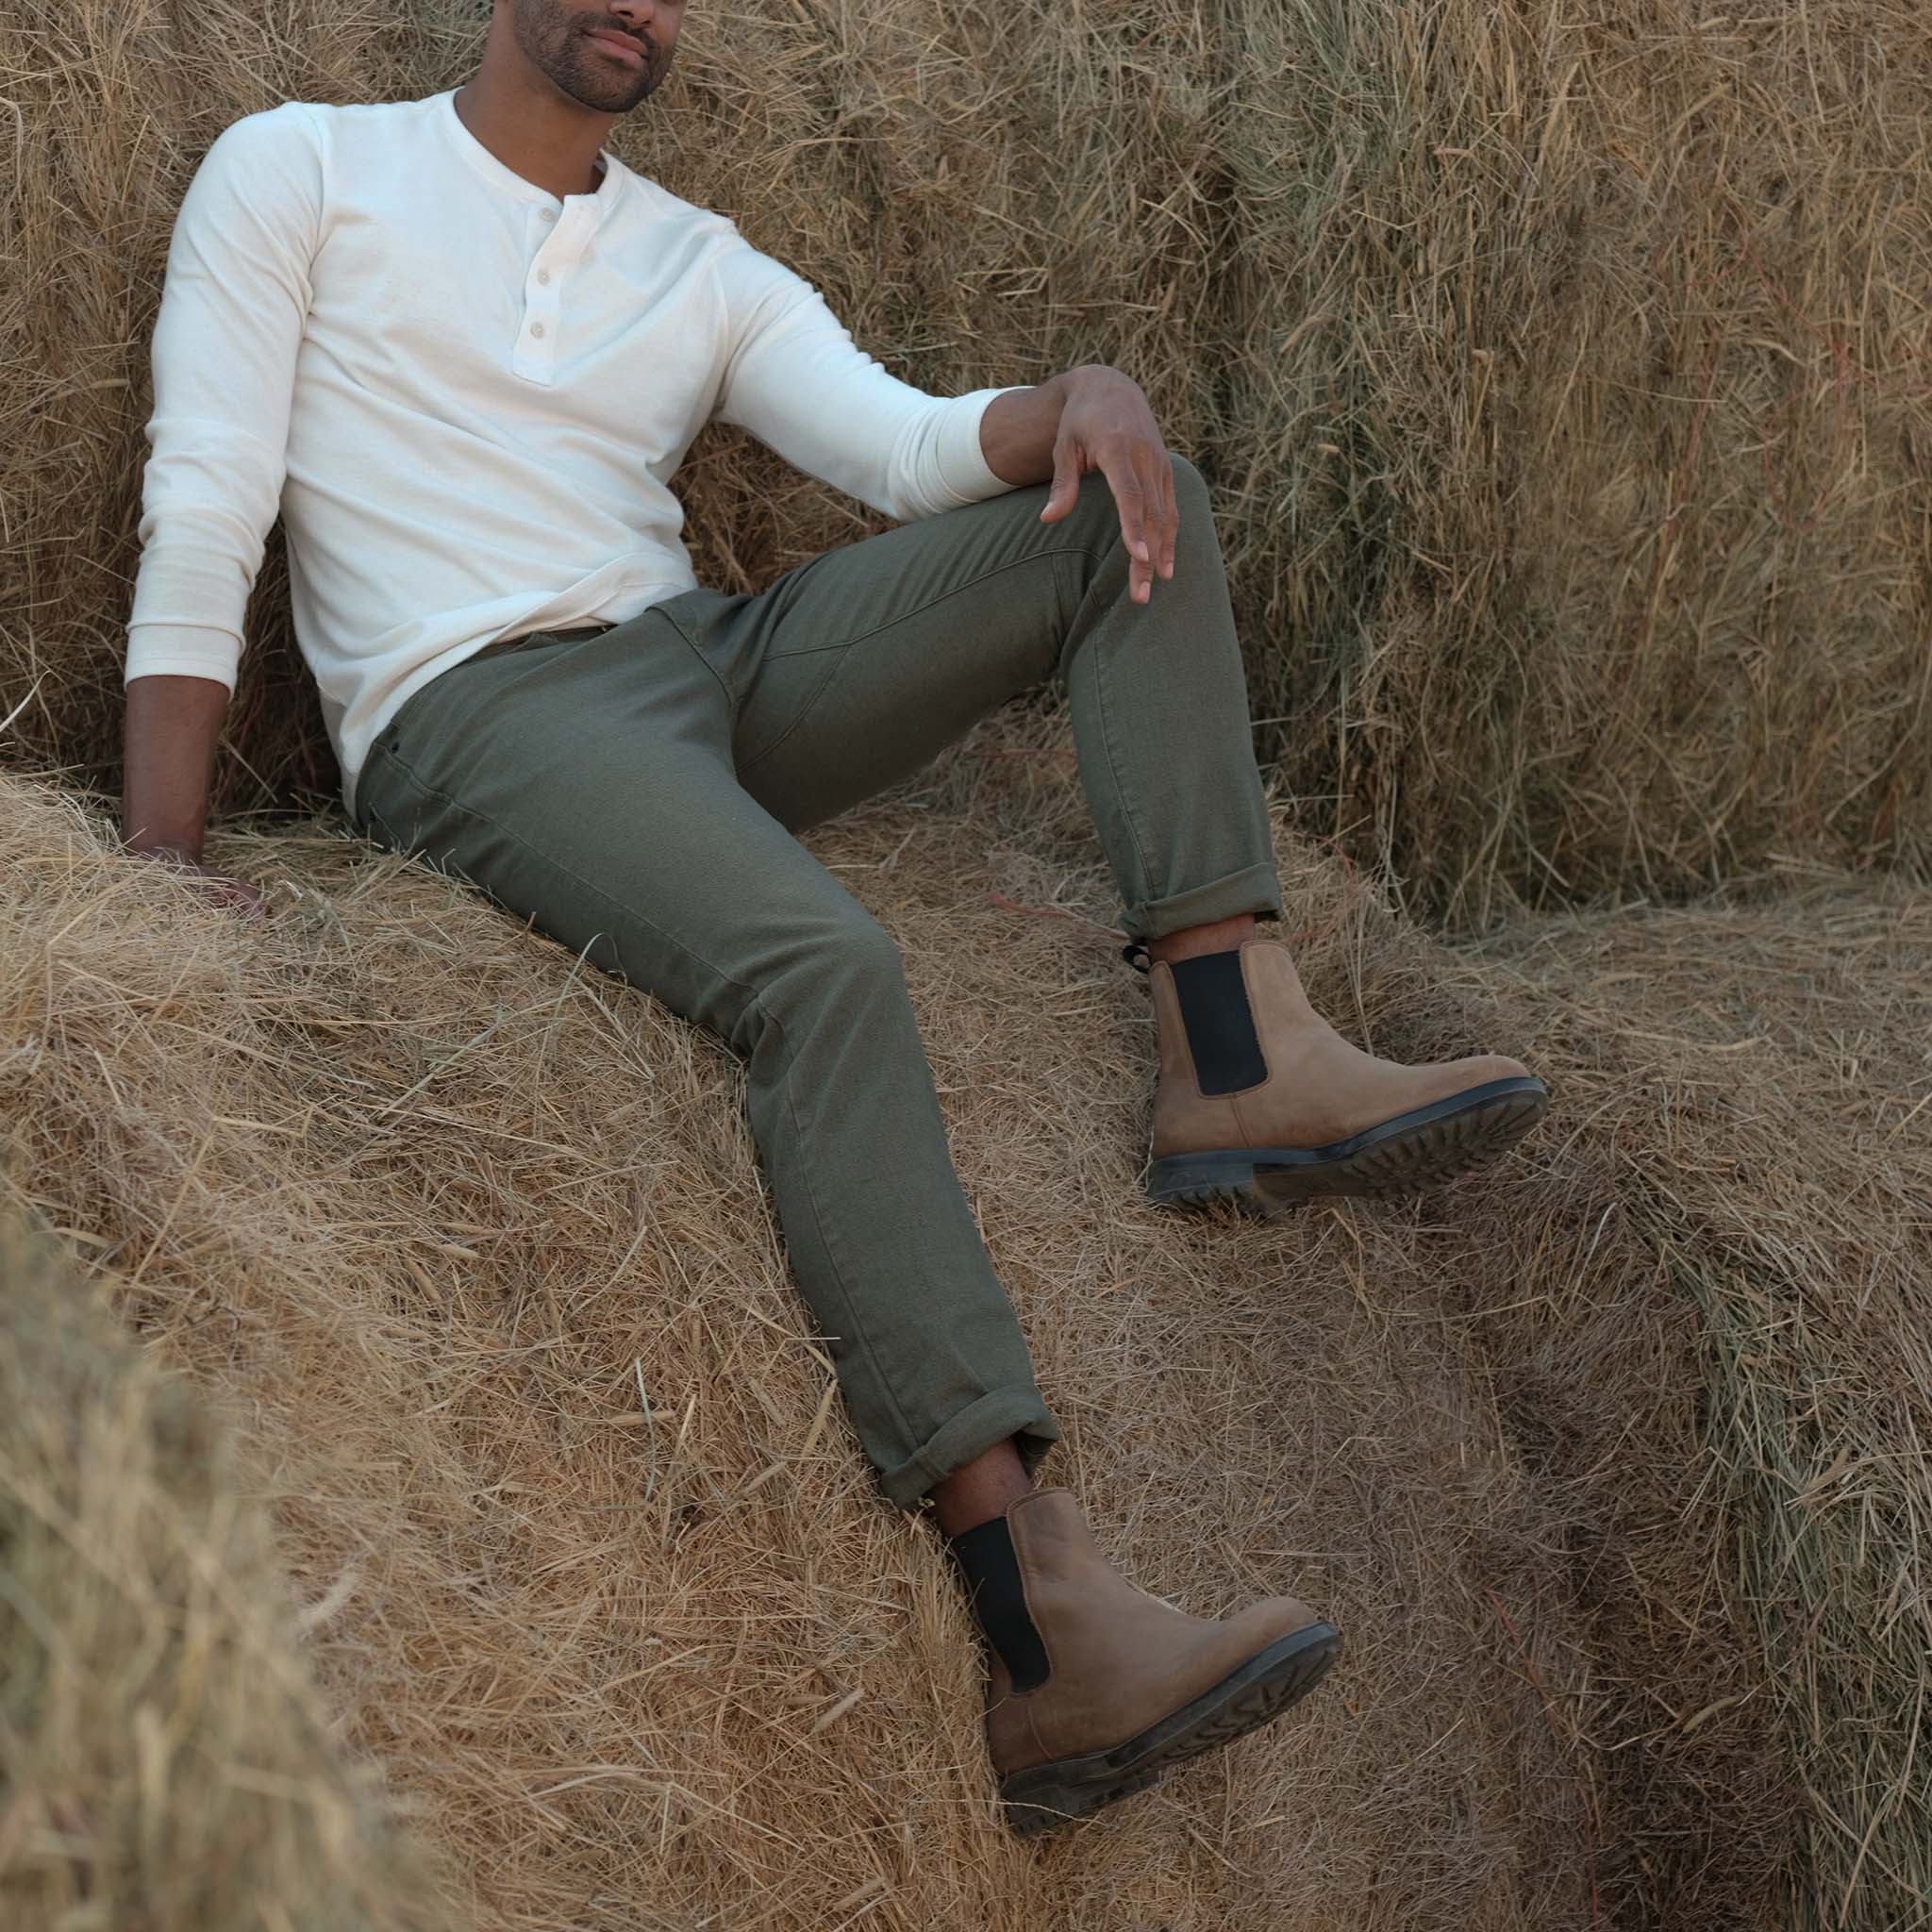 Image 3 of the Daytripper Chelsea Boot Tobacco on model